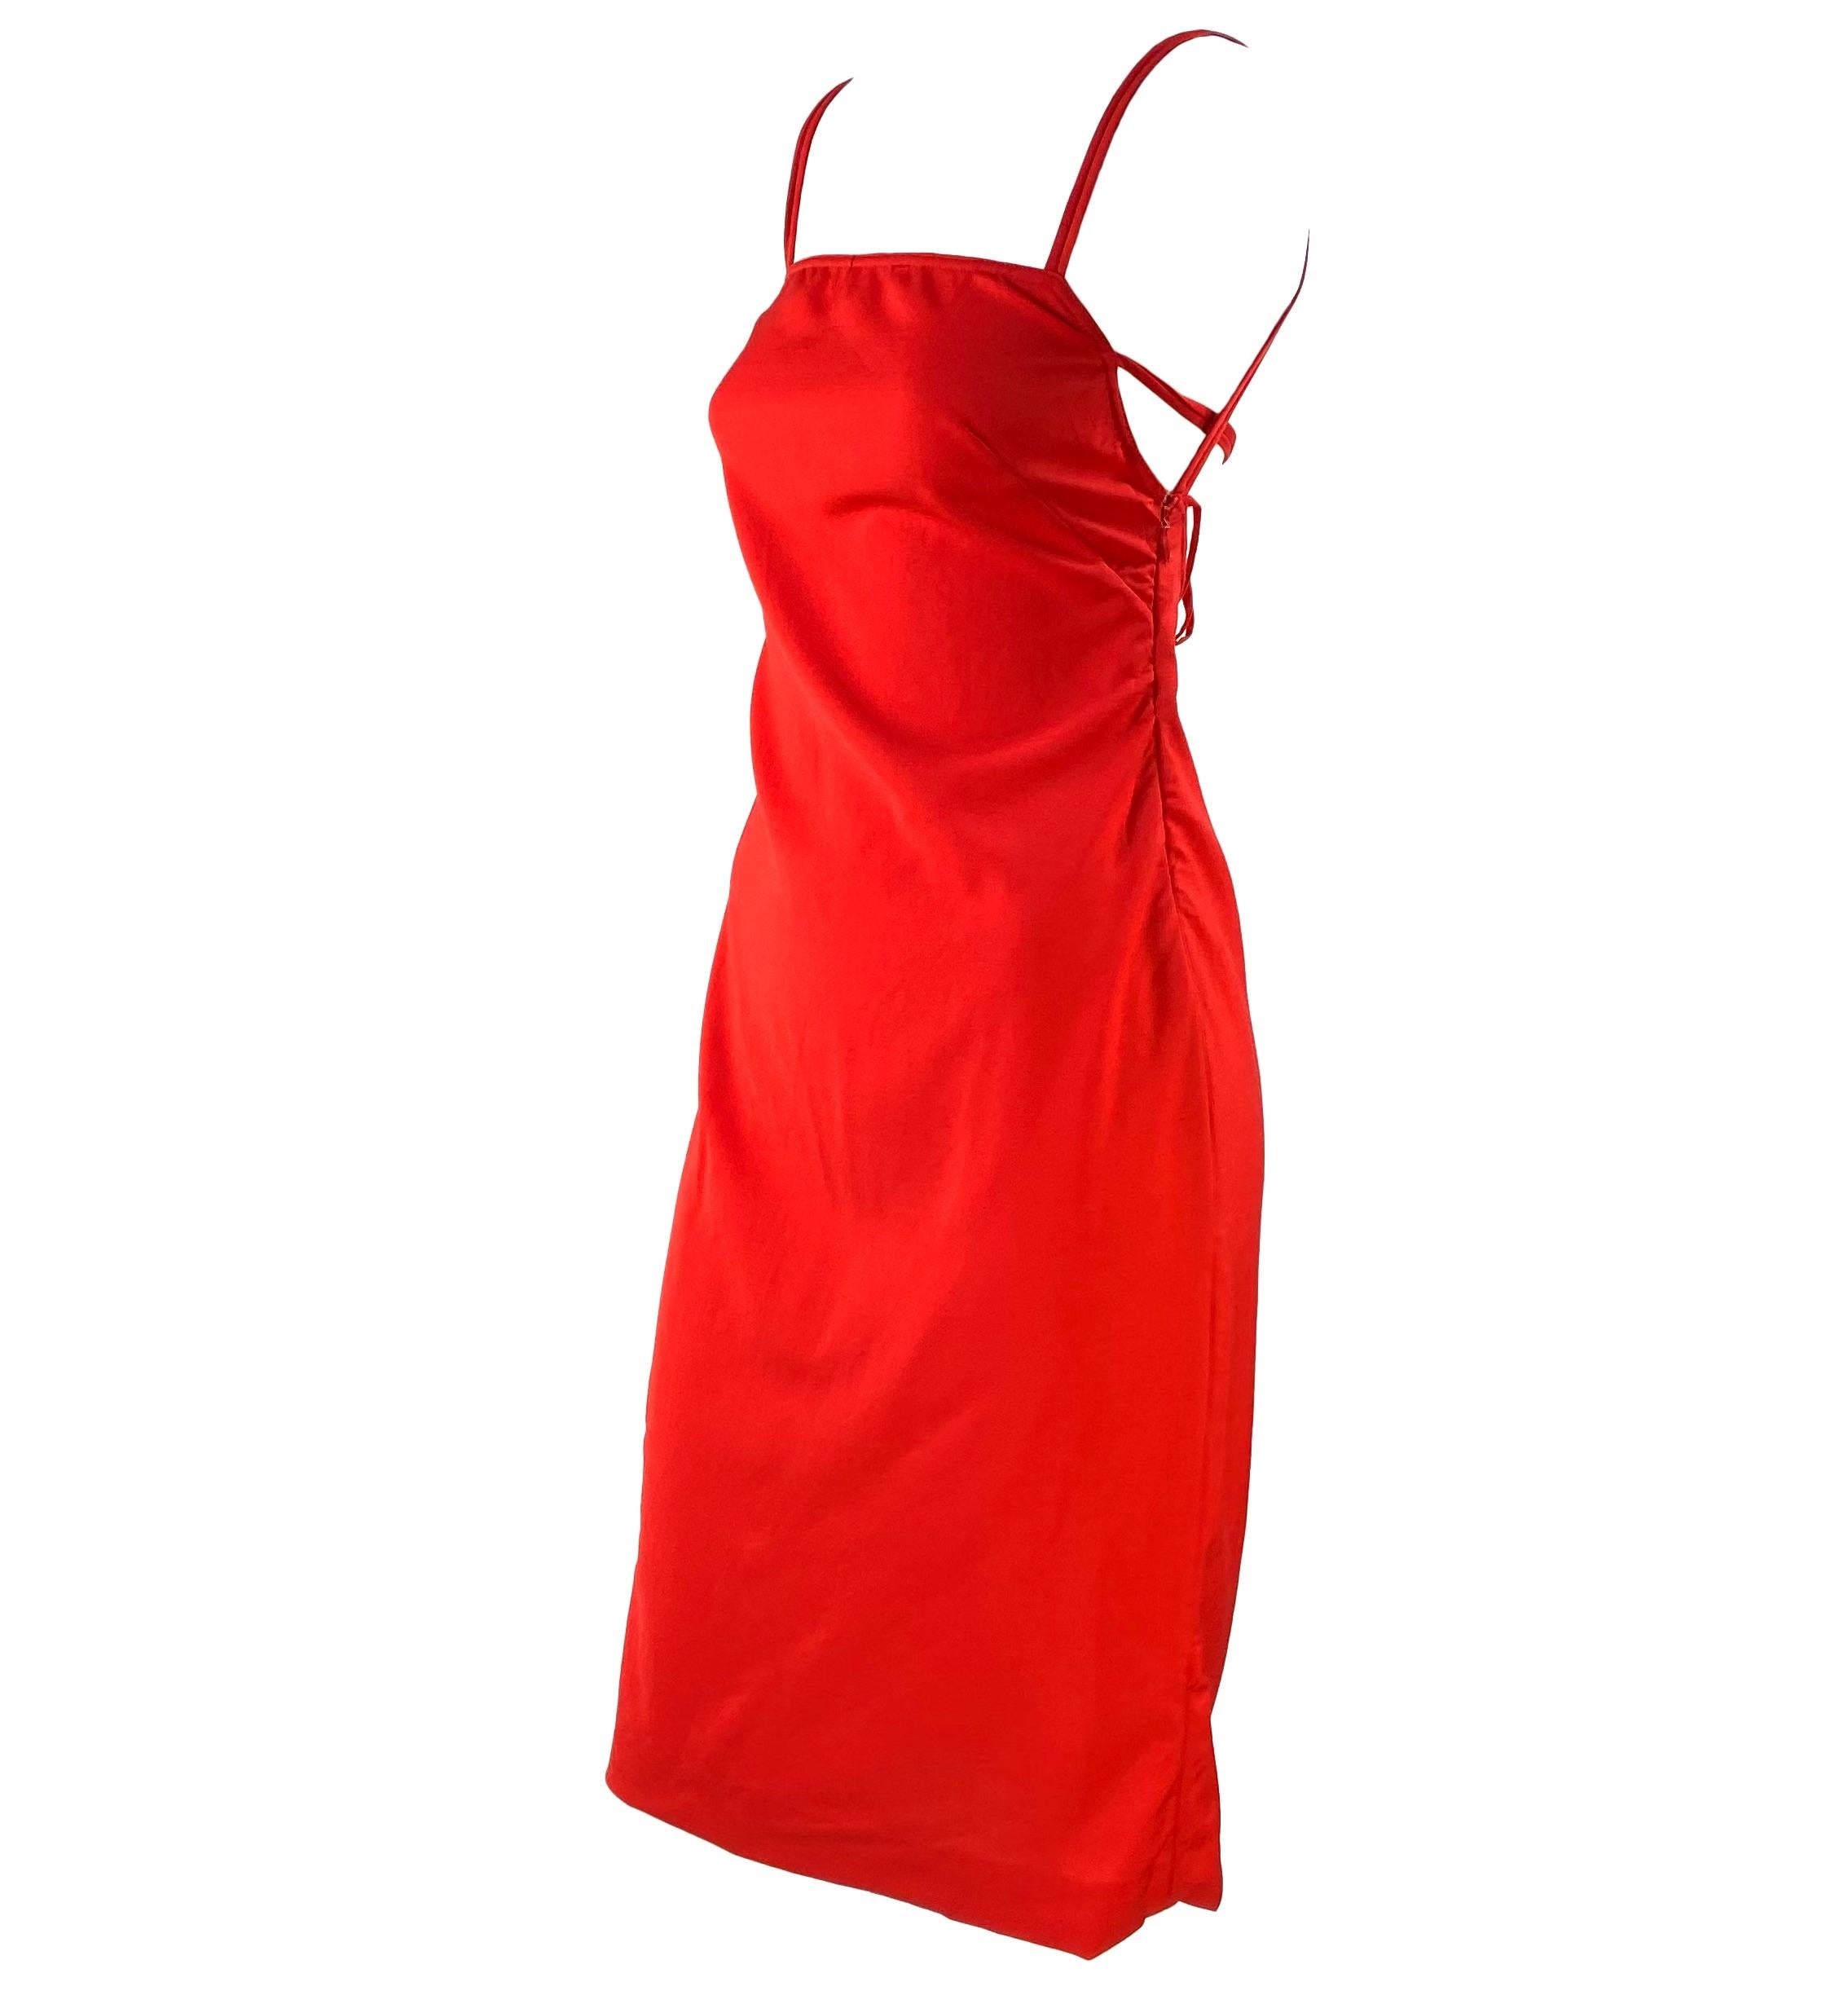 S/S 2002 Gianni Versace by Donatella Red Lace Up Backless Cocktail Dress In Excellent Condition For Sale In West Hollywood, CA